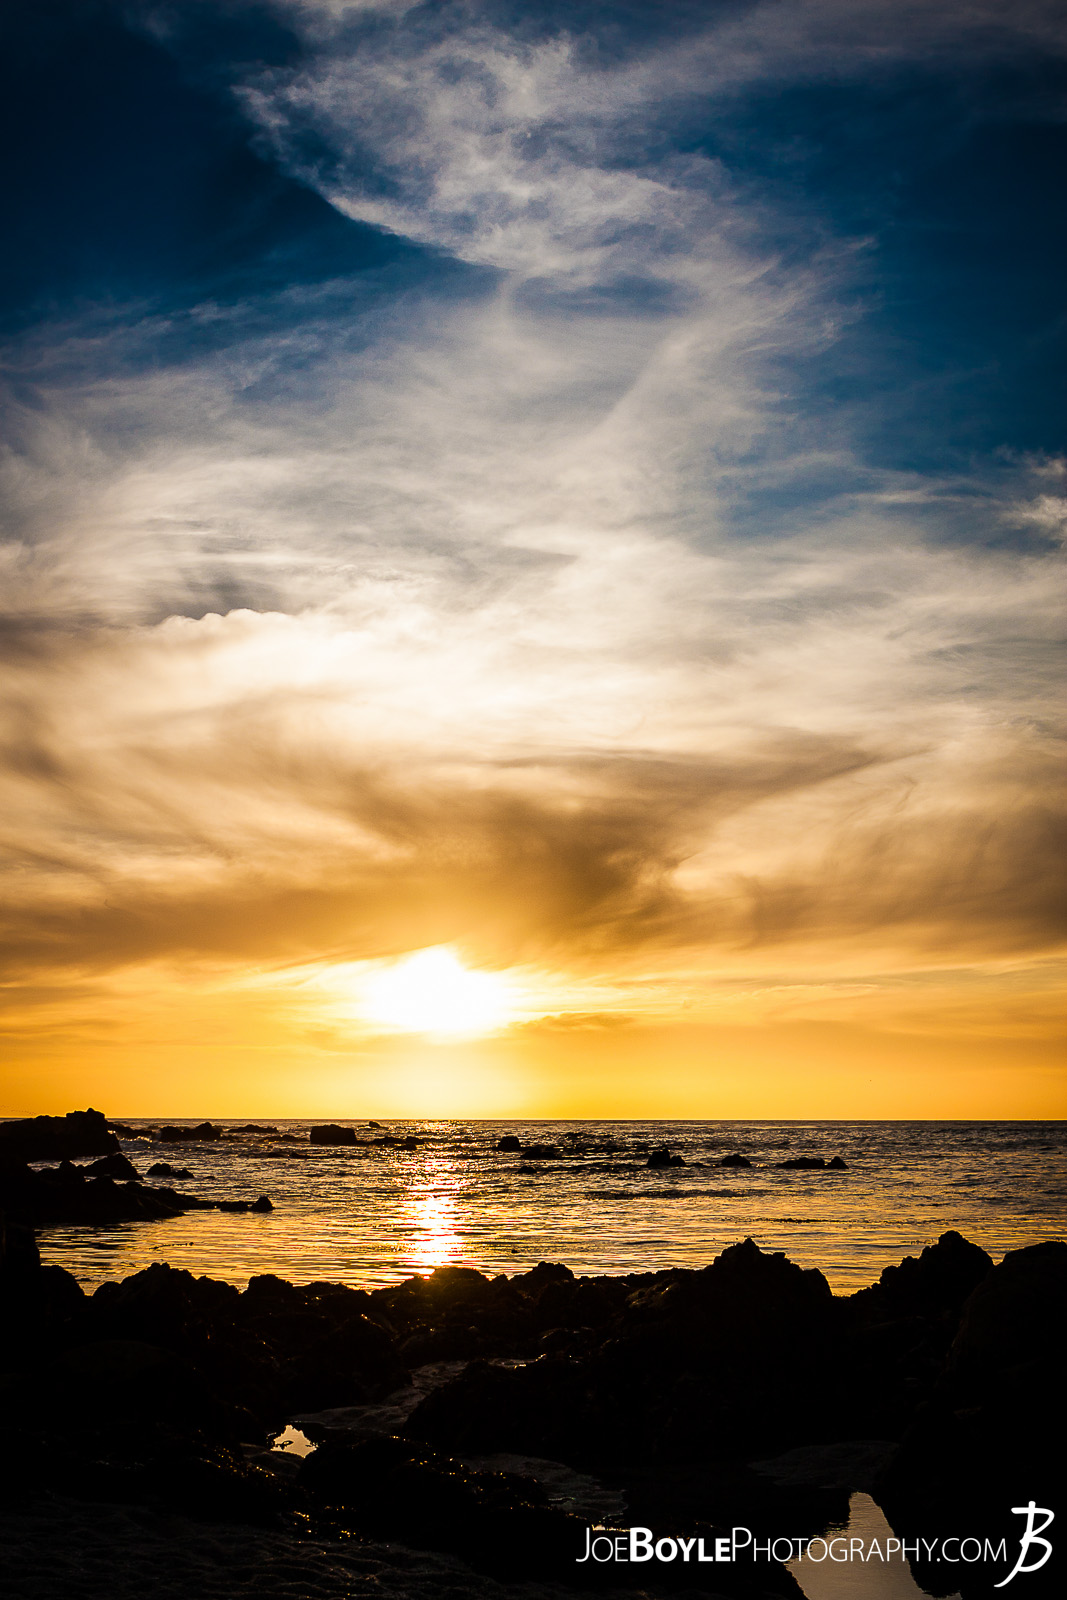  When I was traveling to Monterey, California I spent a lot of time just walking around the city, Pacific Grove and the sand dunes in the area. Here is a shot of a beautiful, golden sunset in Pacific Grove! 